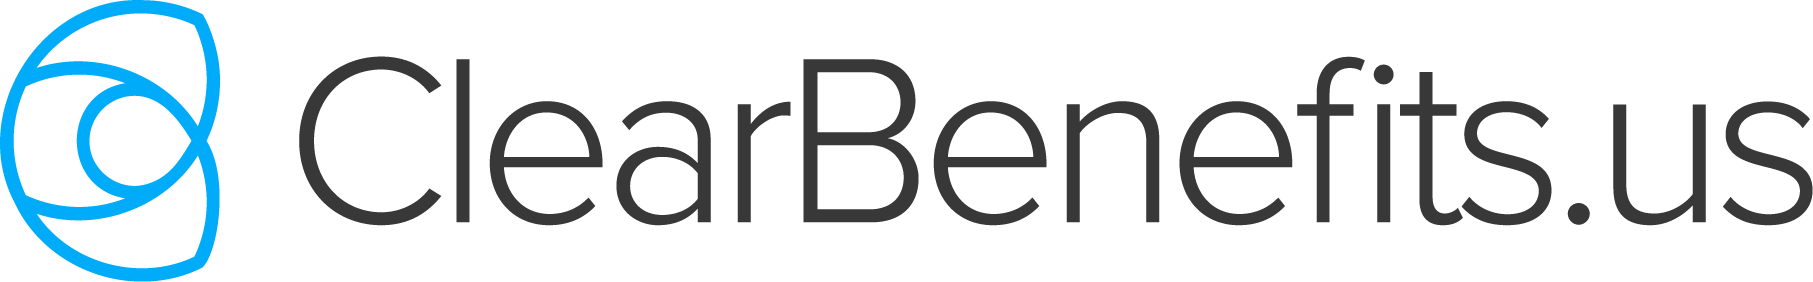 Clearbenefits.us Logo